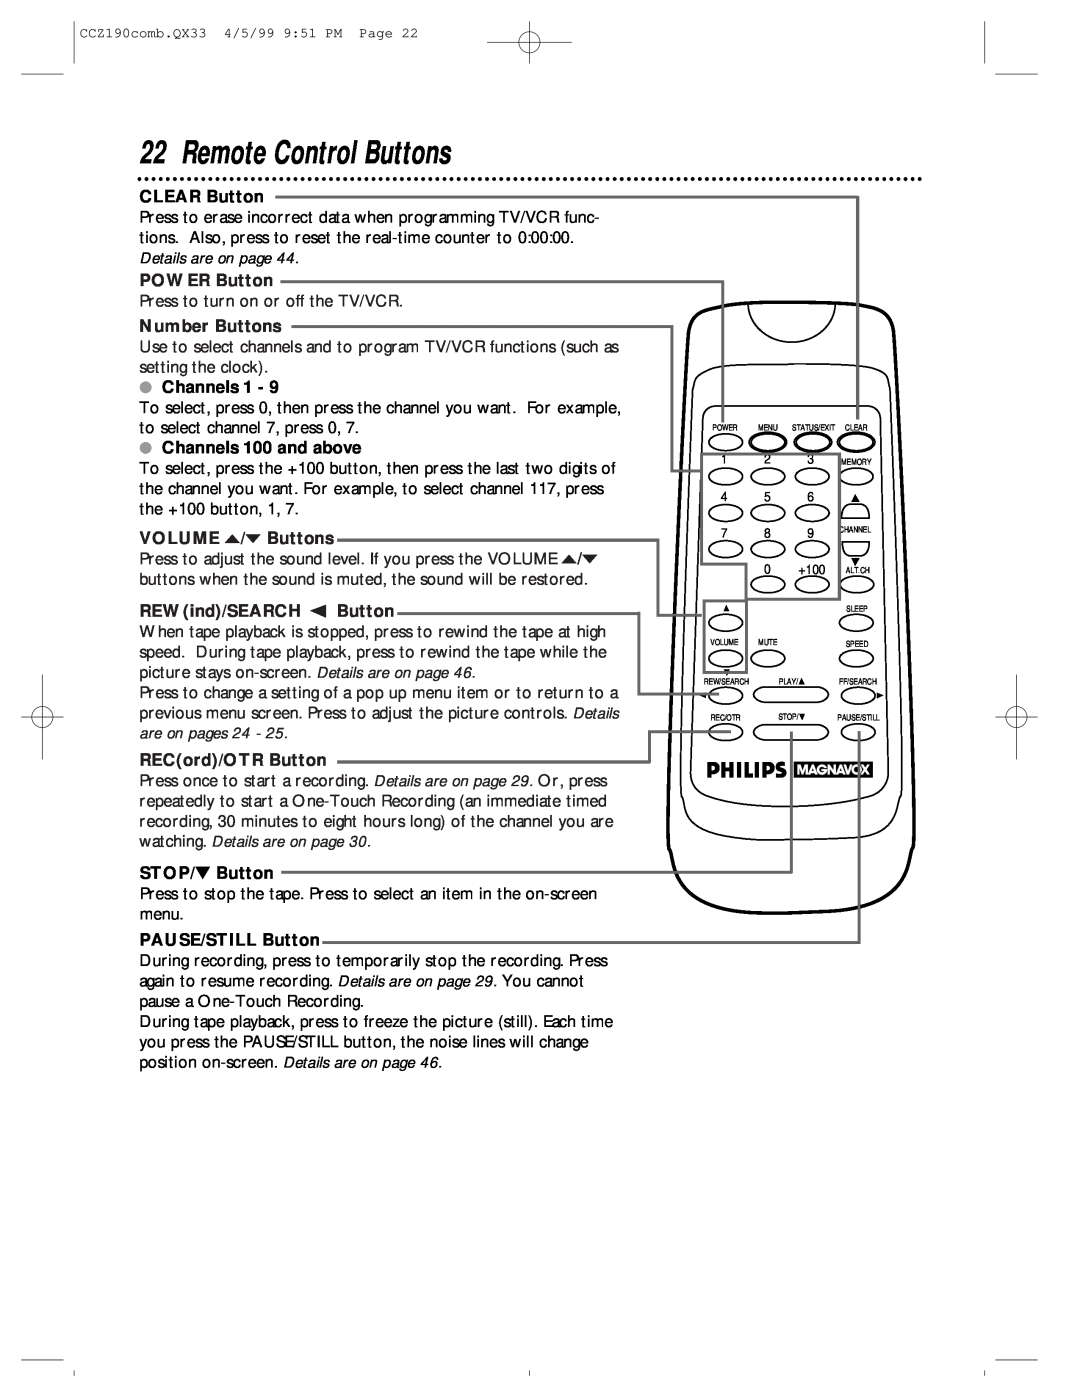 Magnavox CCZ190AT owner manual Remote Control Buttons, are on pages 24, watching. Details are on page 